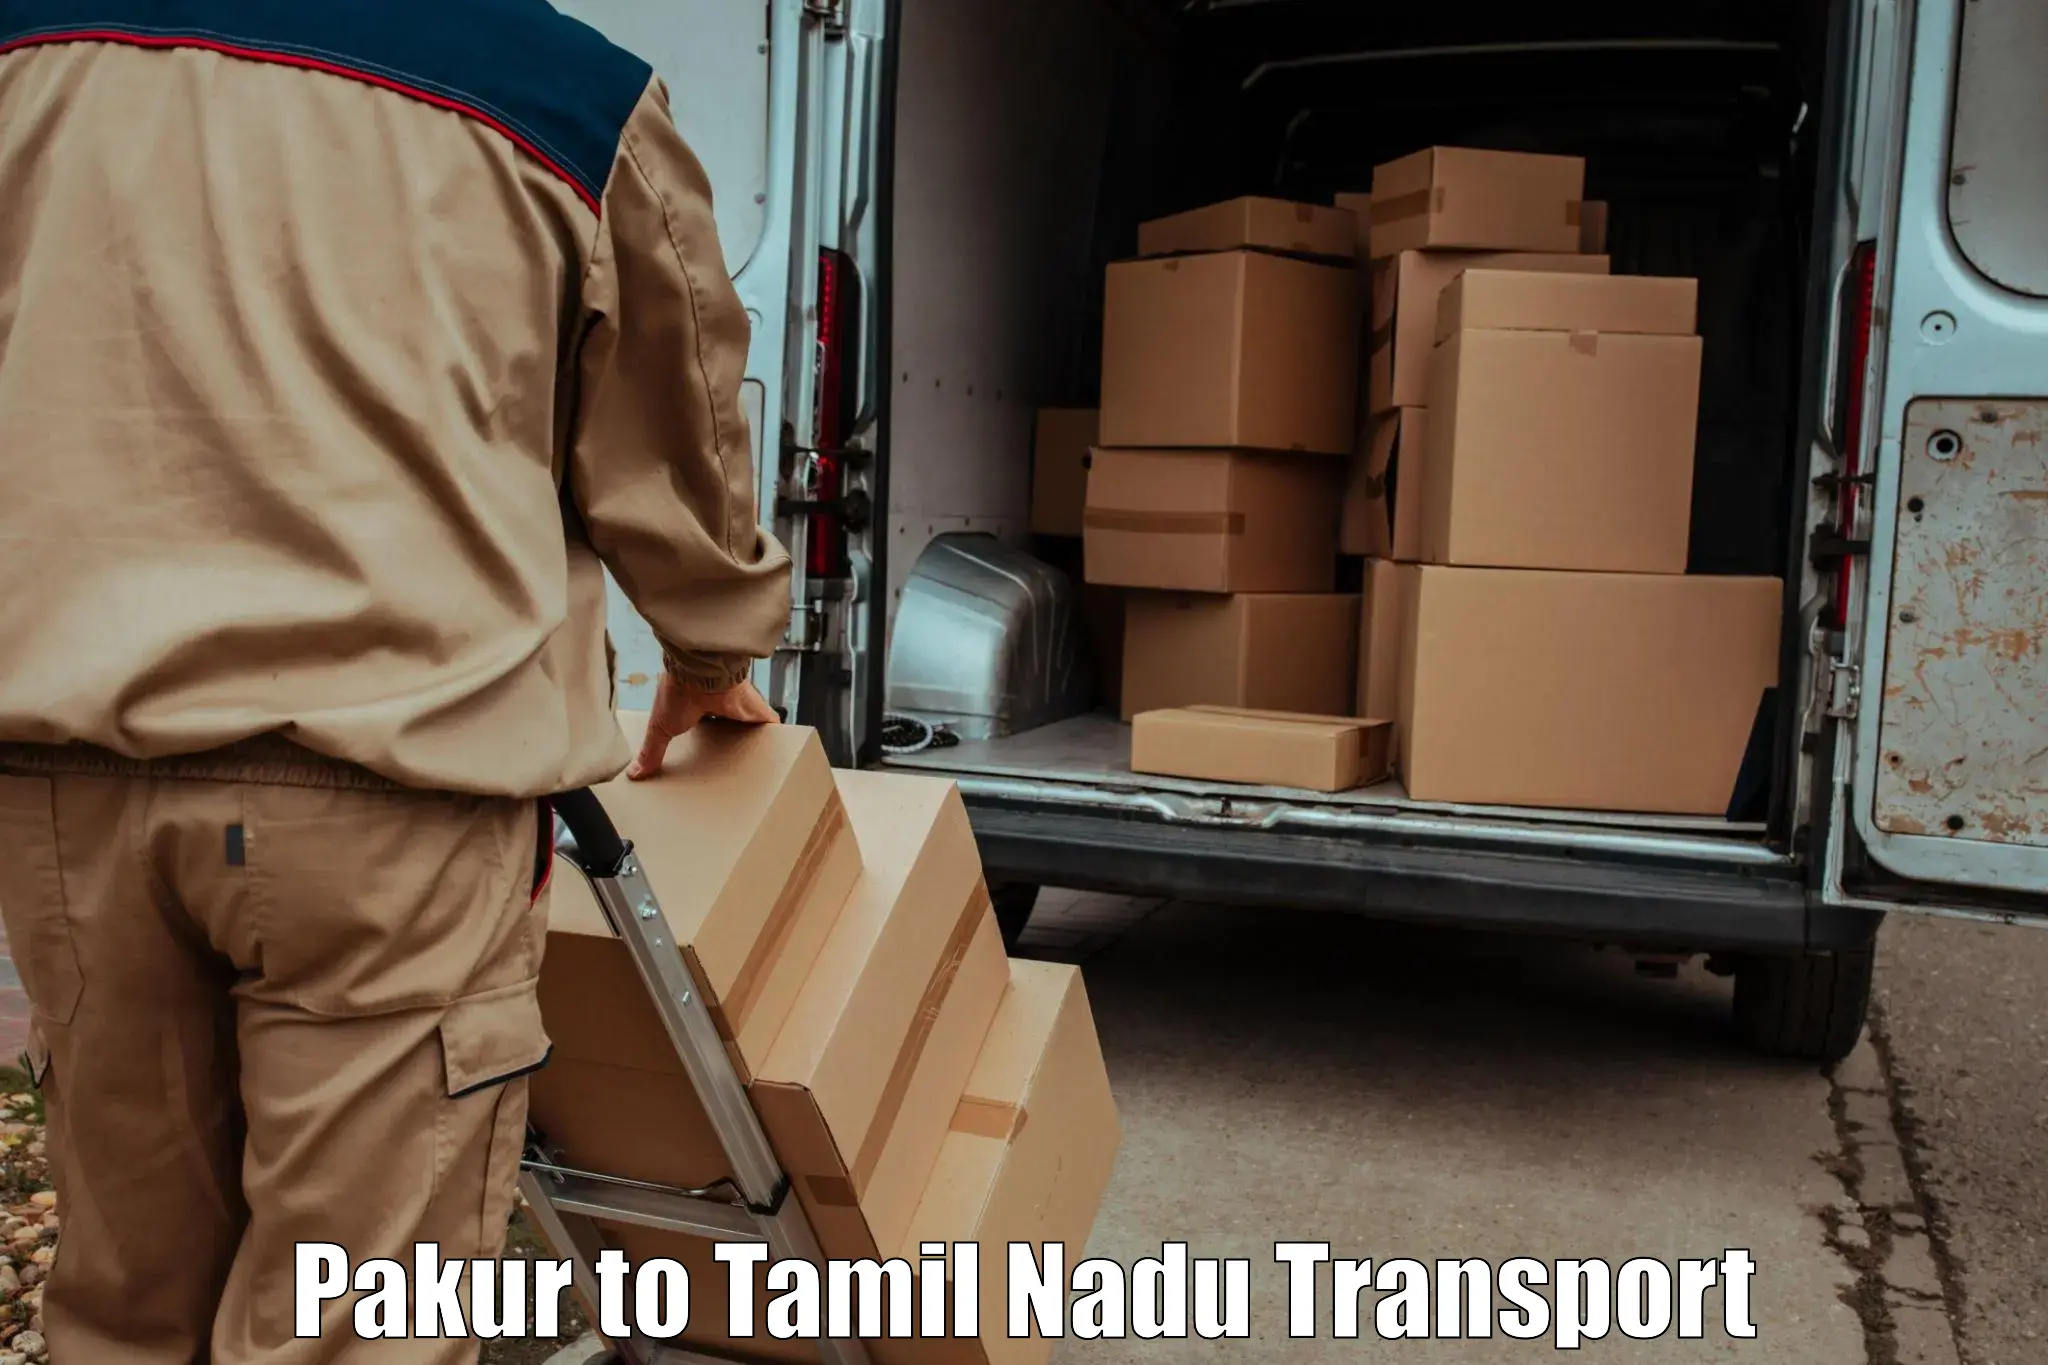 Online transport Pakur to Meenakshi Academy of Higher Education and Research Chennai